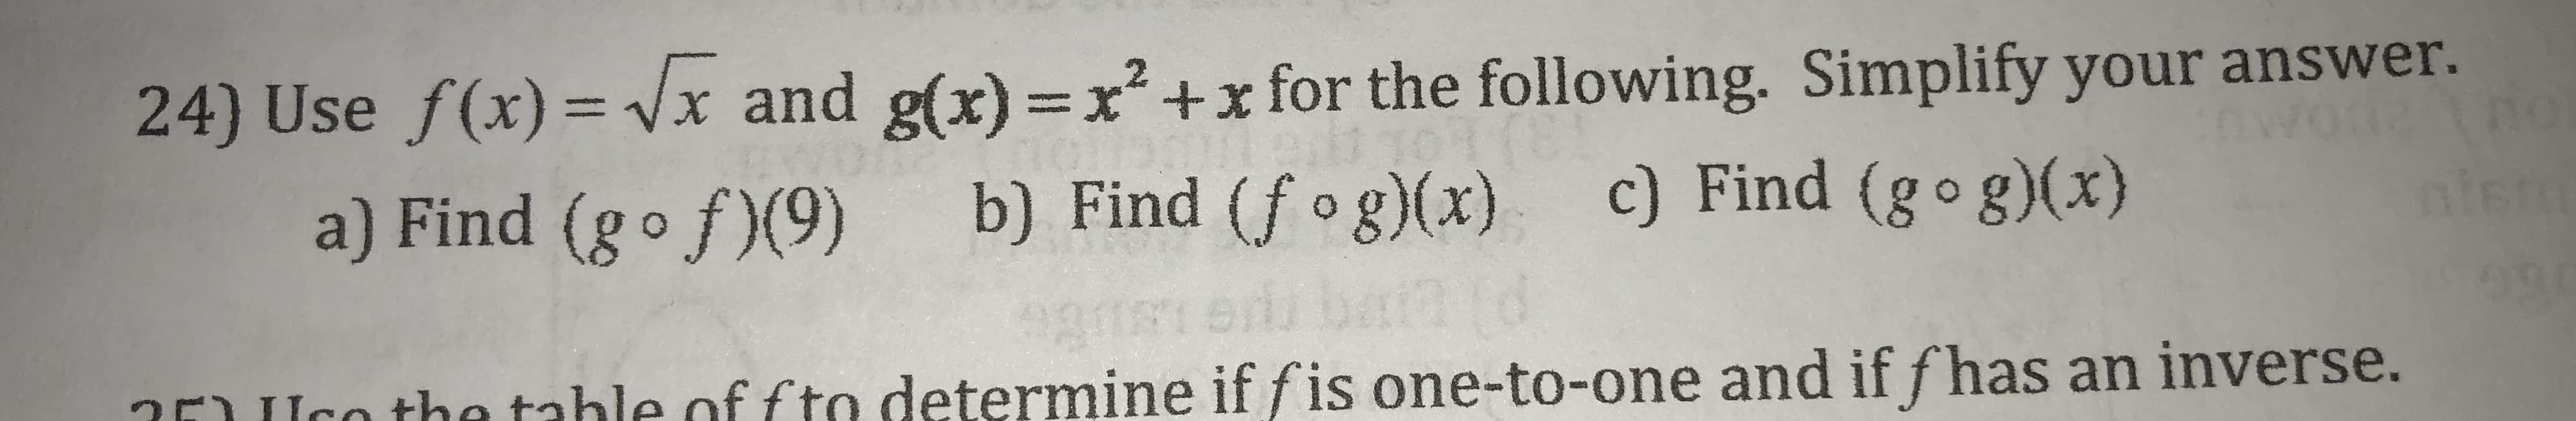 24) Use f (x) =
and g(x) = x2 +x for the following. Simplify your answer.
a) Find (g f(9) b) Find f g)x) c) Find (go g)x)
r the tahle of fto determine if fis one-to-one and if fhas an inverse.
